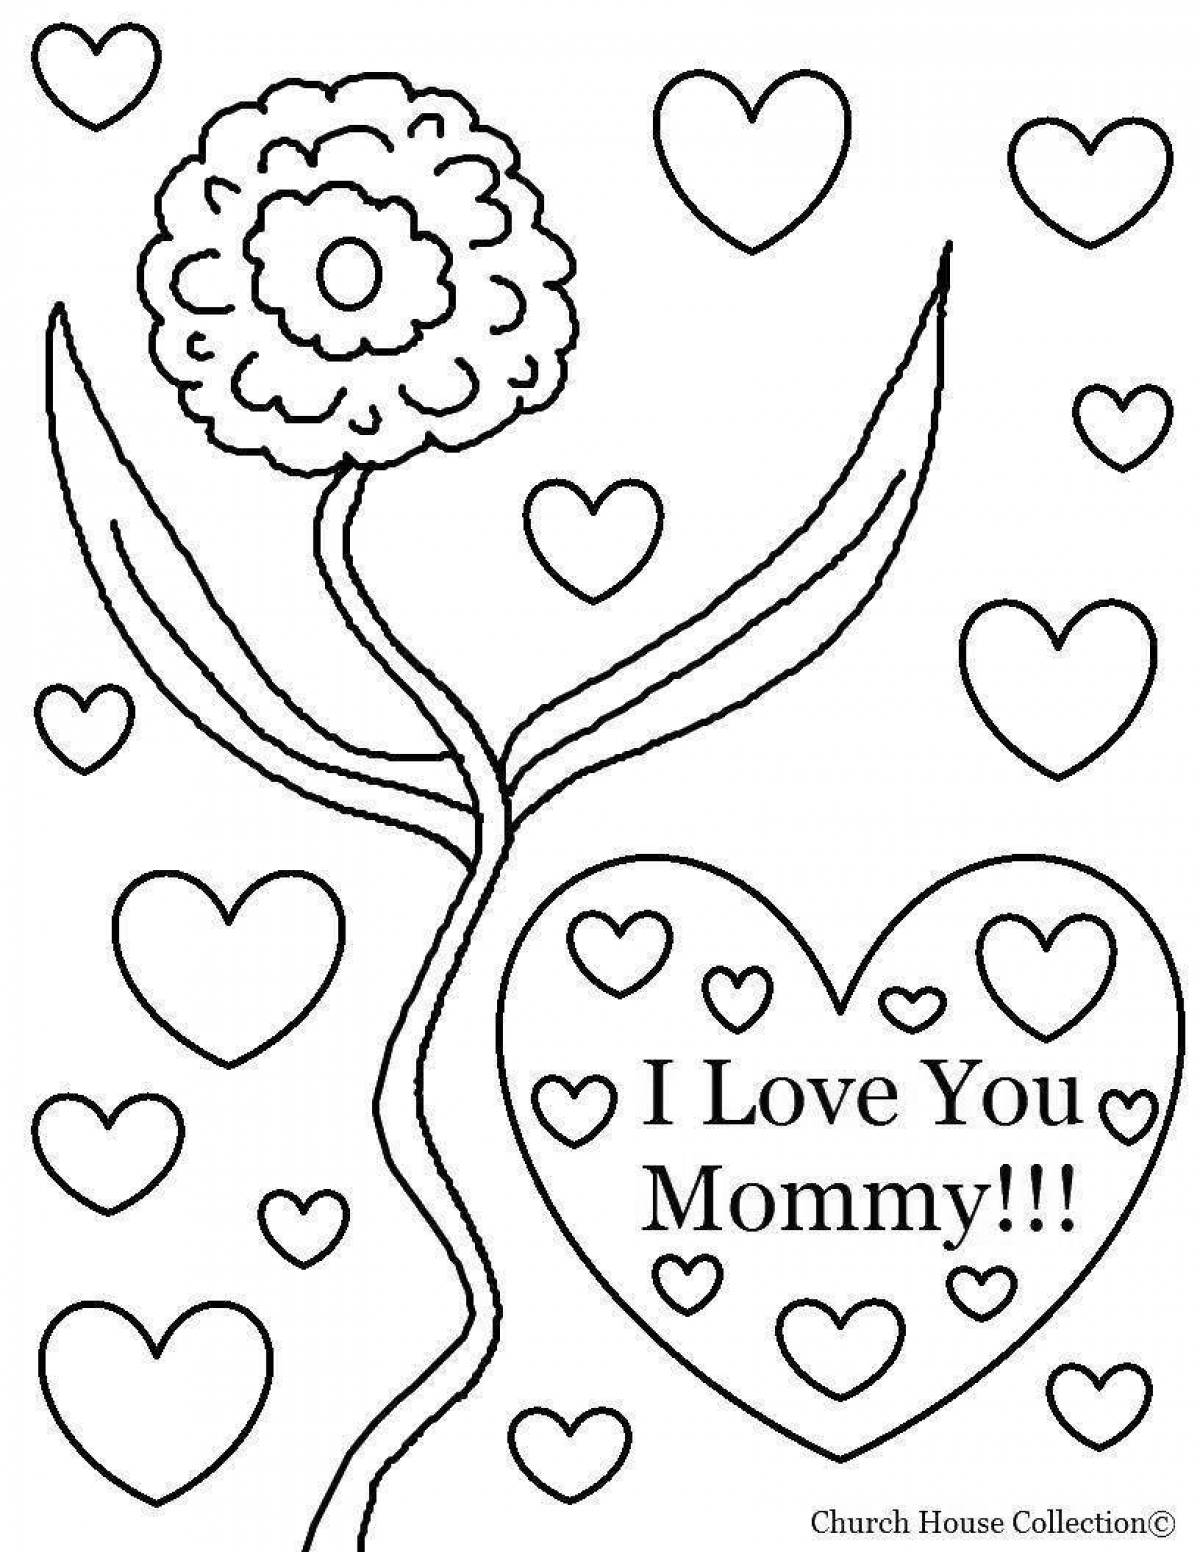 Coloring page nice mommy